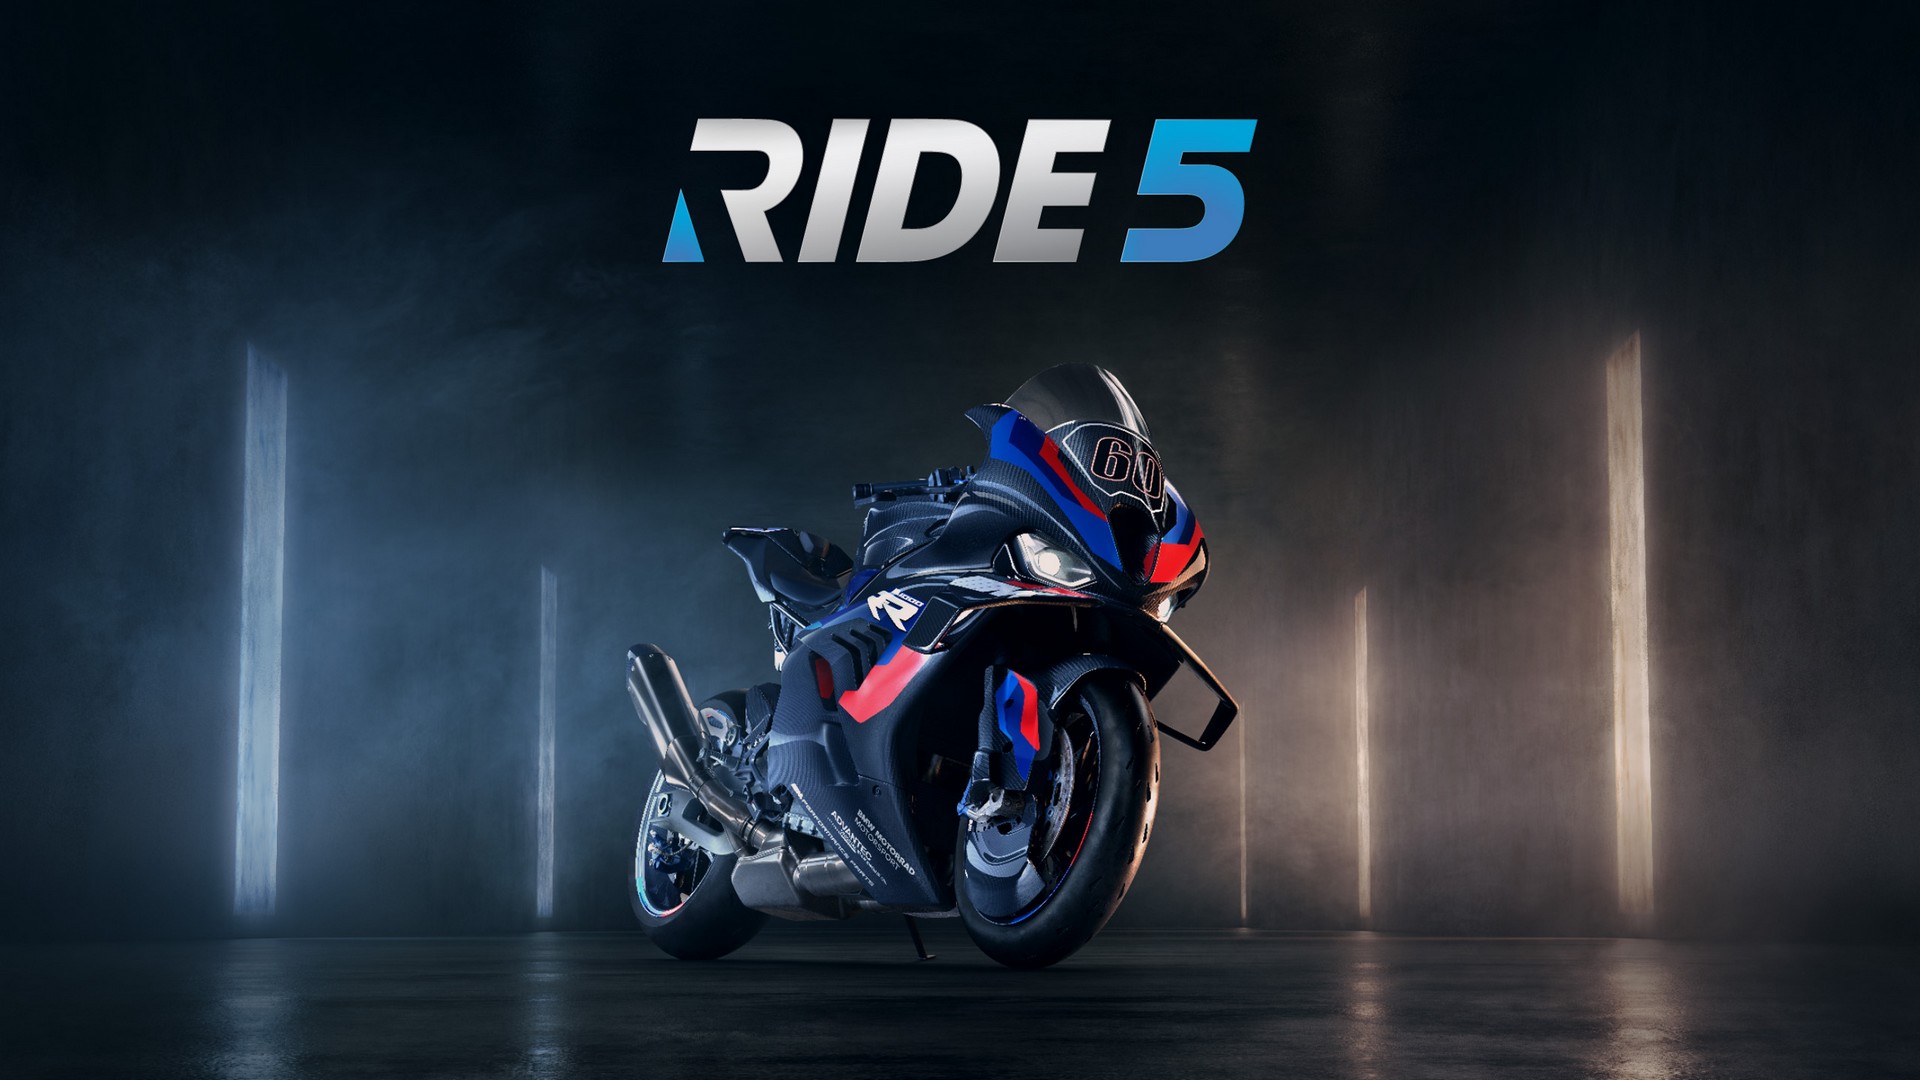 Ride 5 Digital Artbook Now Available Featuring The Best Virtual Shots From The Community